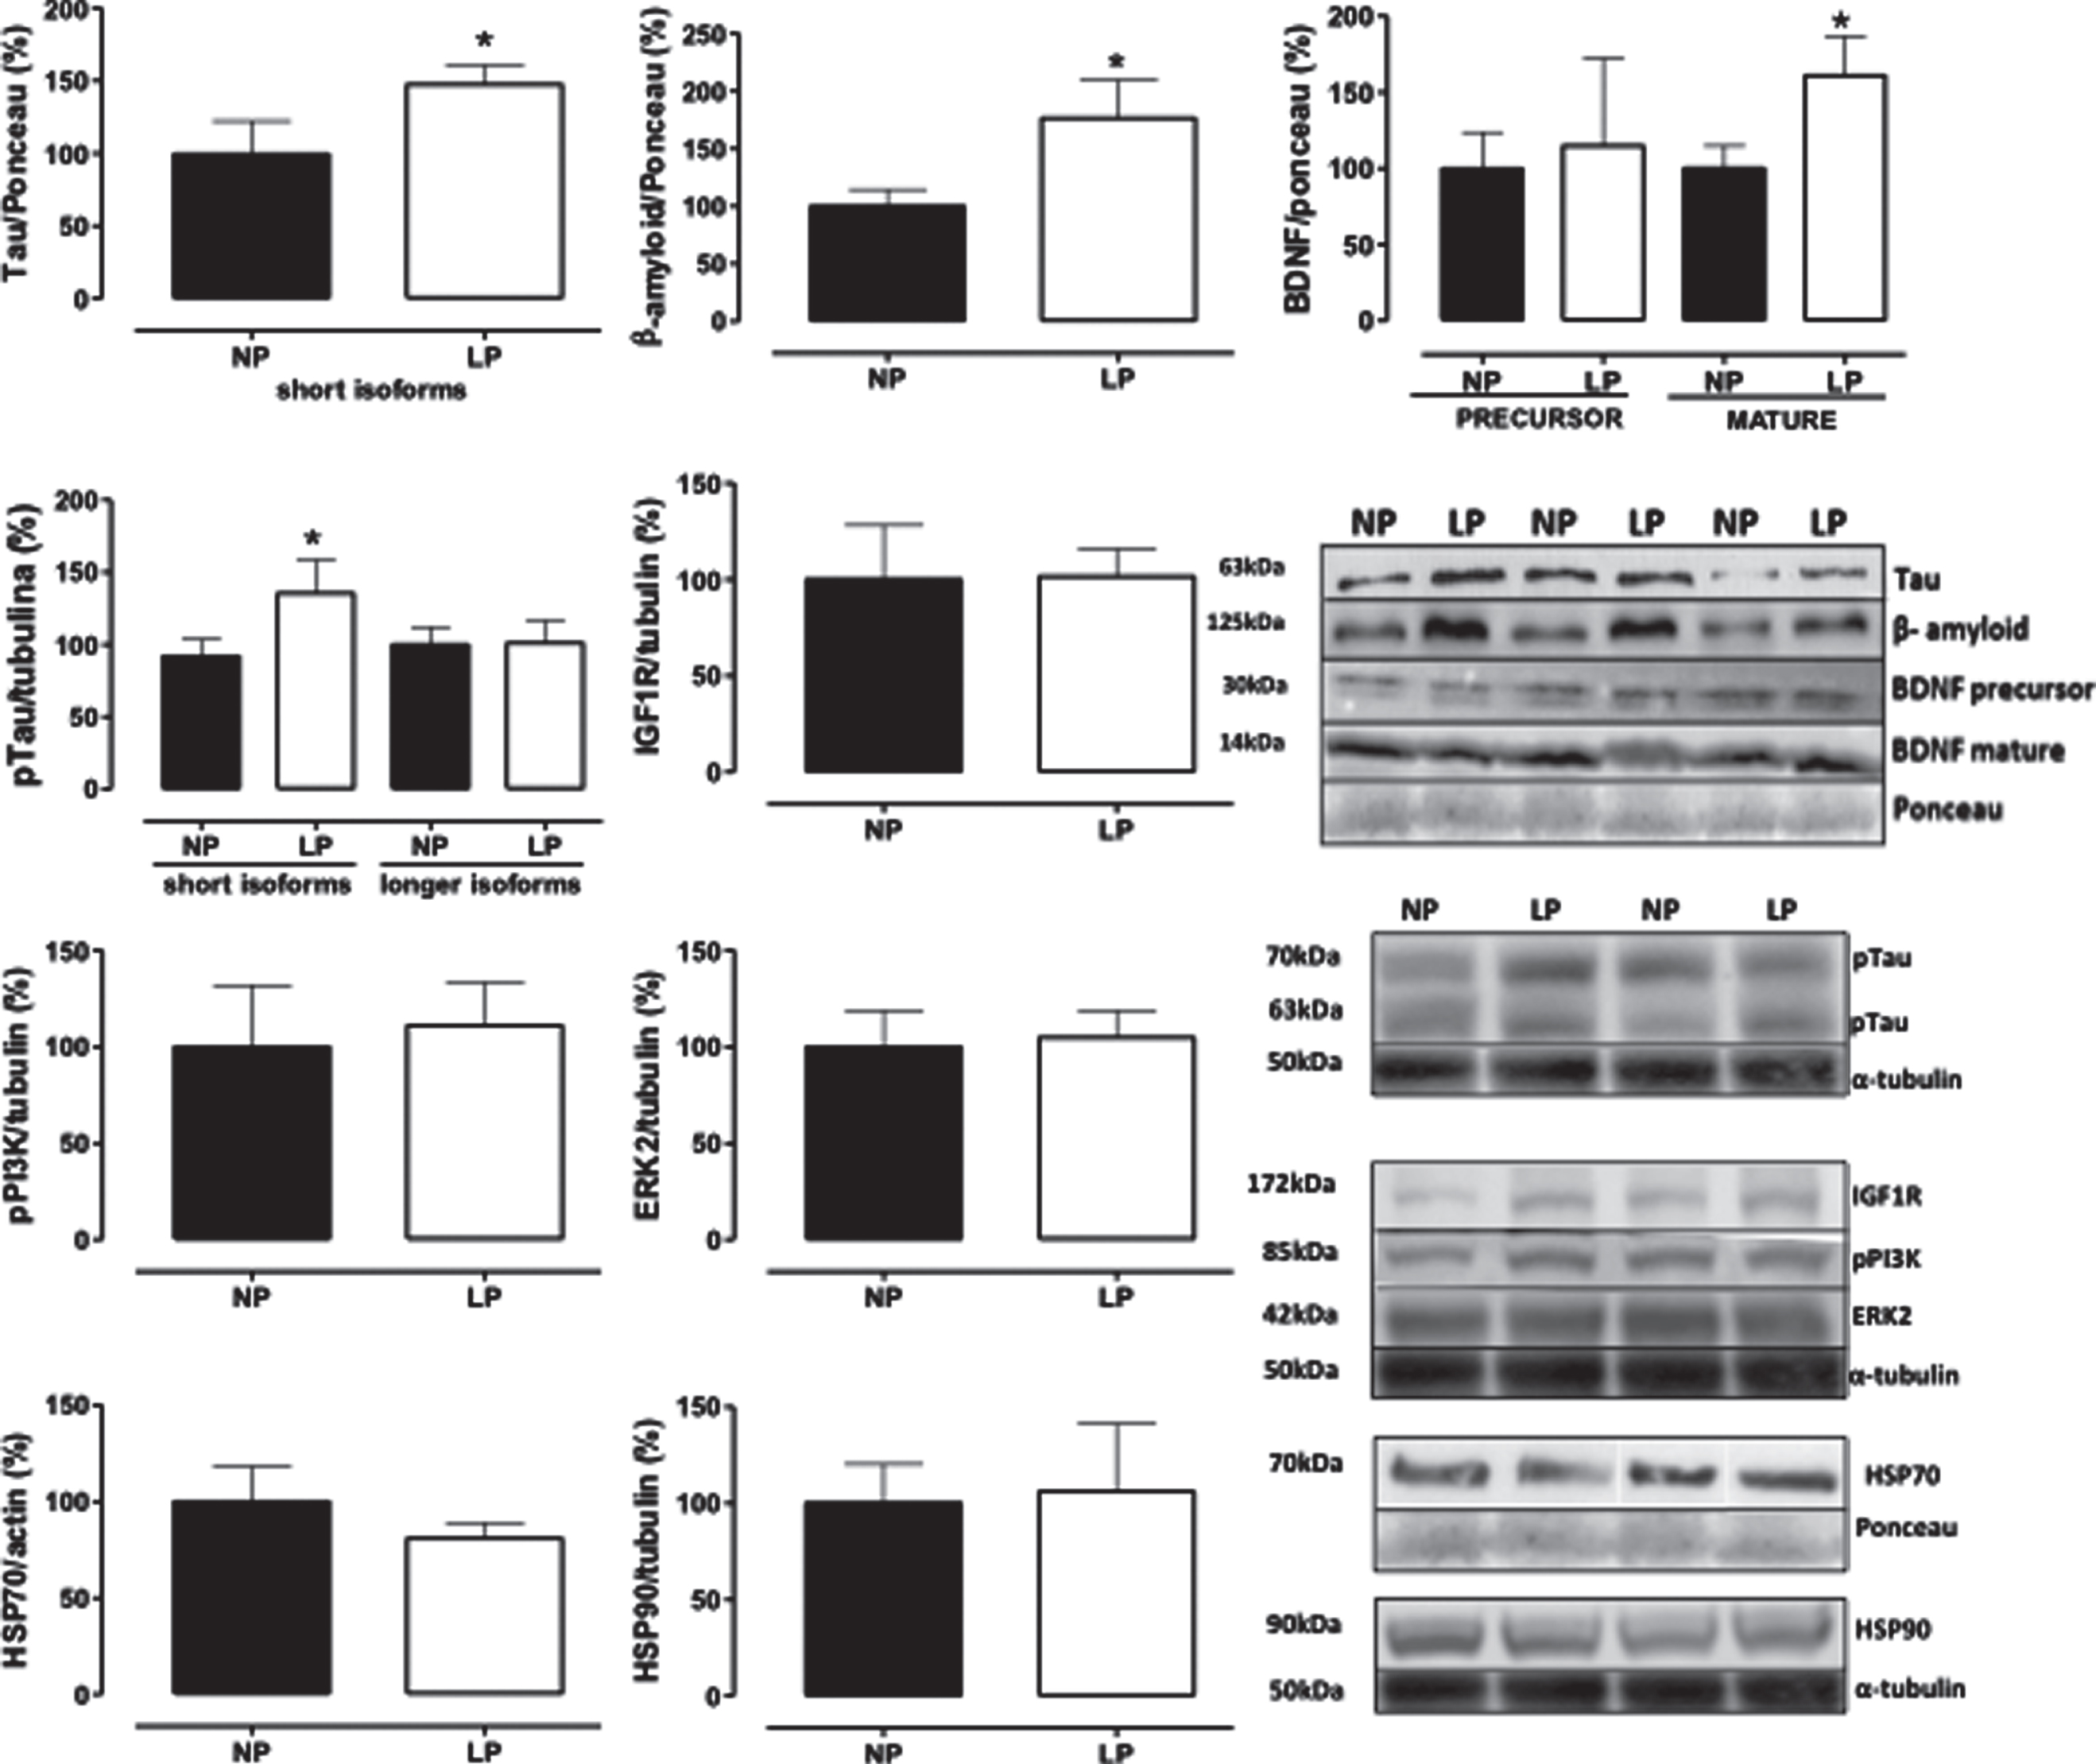 Effect of maternal protein restriction on amyloid-β, tau, BDNF, HSP70, HSP90, IGF1R, pPI3K, and ERK2 proteins, measured using immunoblotting analysis, in the isolated whole hippocampus of 88-week-old LP (n = 4) as compared to age-matched NP (n = 4) rats. Results are expressed as means±SEM; only one offspring of each litter was used for immunoblotting experiments. A comparison involving only two samples of independent observations was performed using a Student’s t-test. The level of significance was set at *p < 0.05.